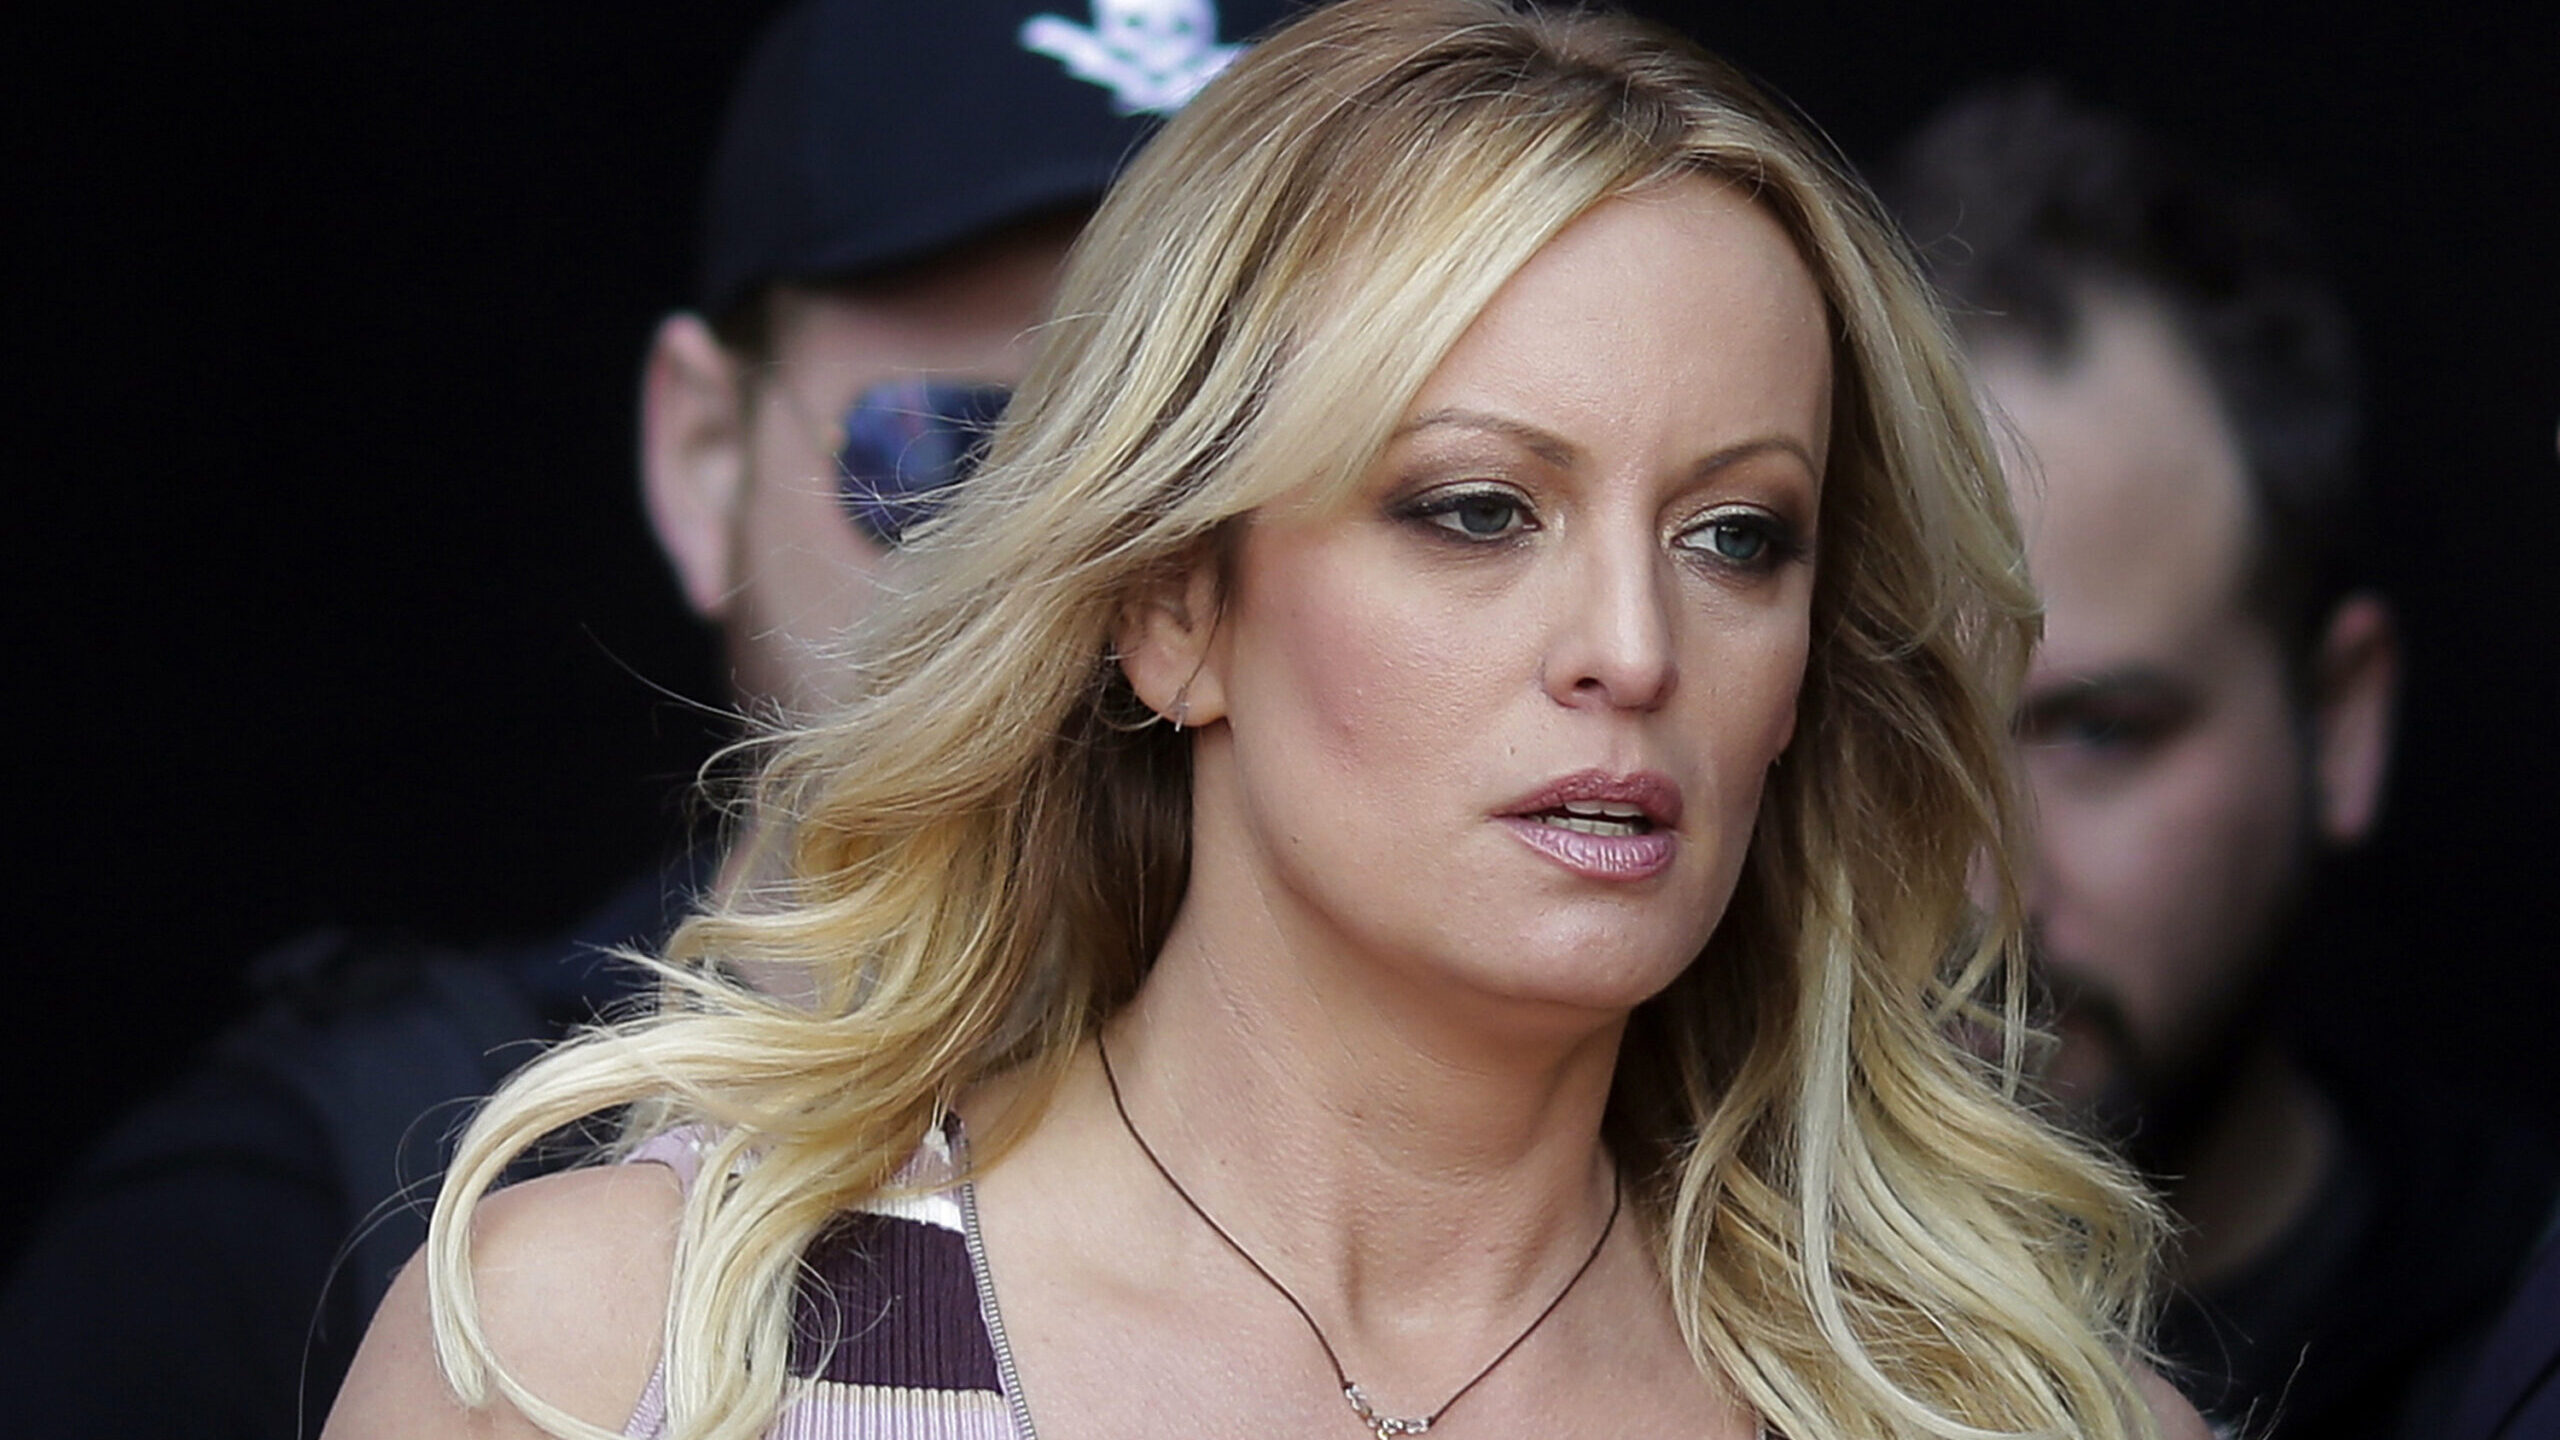 Adult film actress Stormy Daniels, who just testified in the Trump hush money trial....